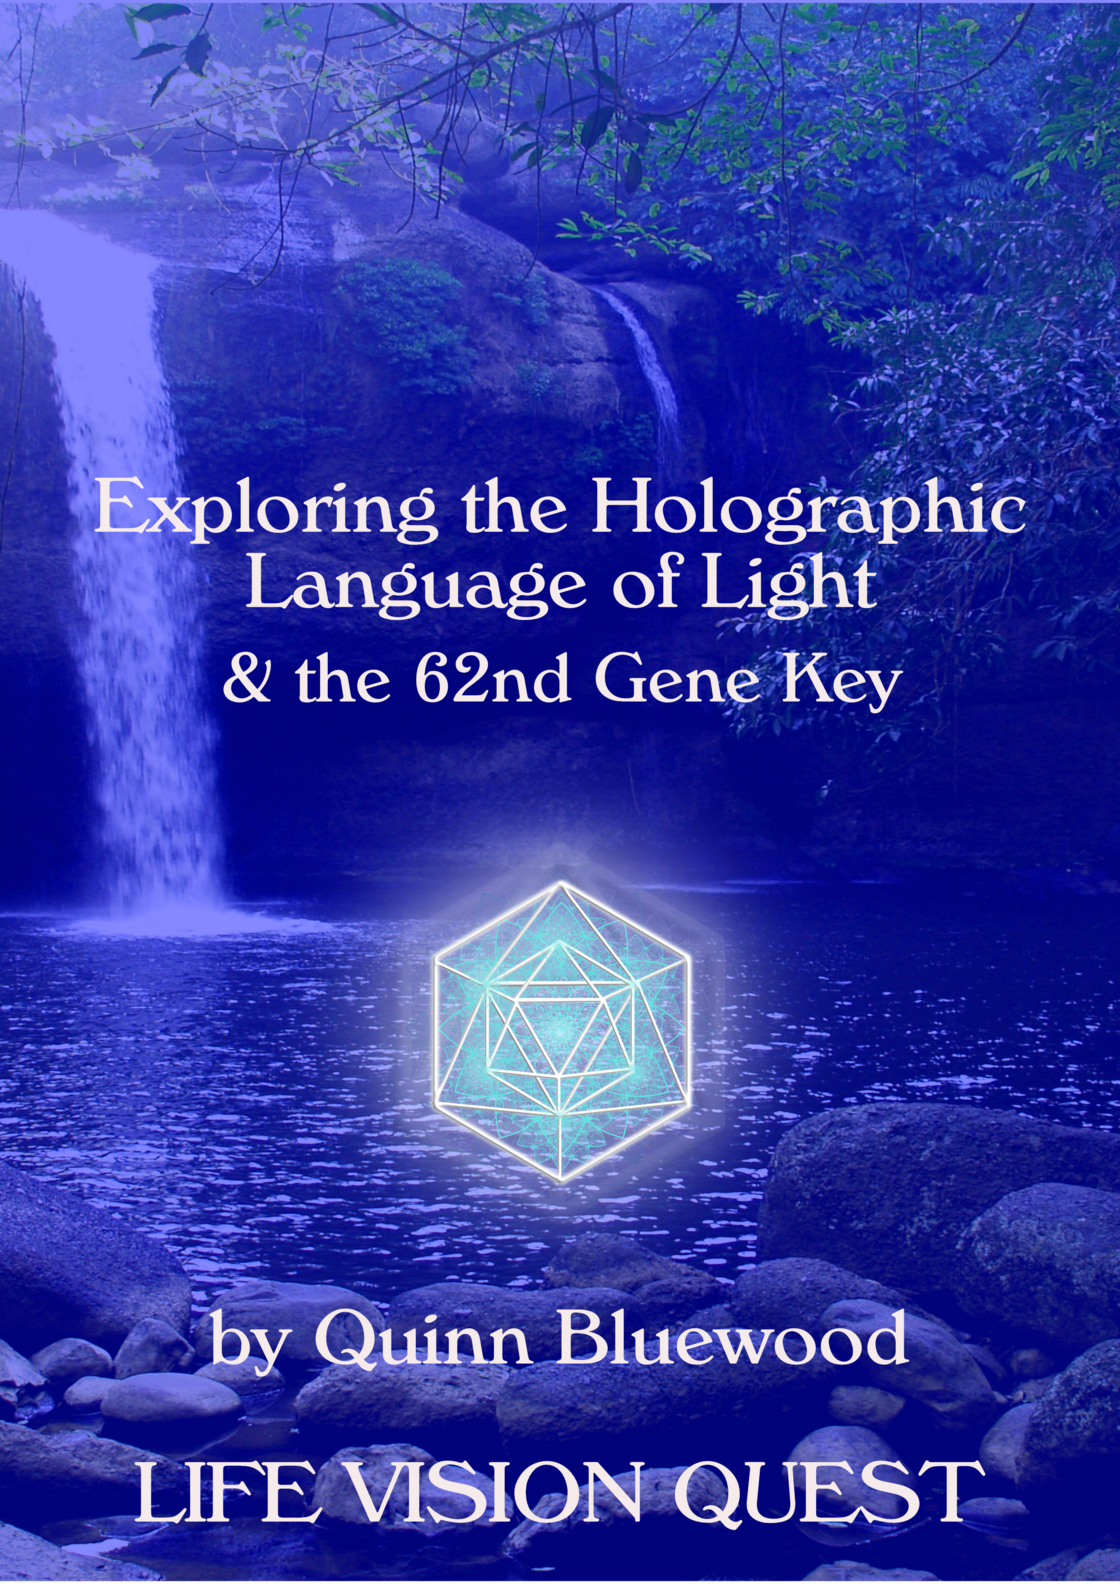 LVQ waterfall Exploring Holographic Language of Light A4